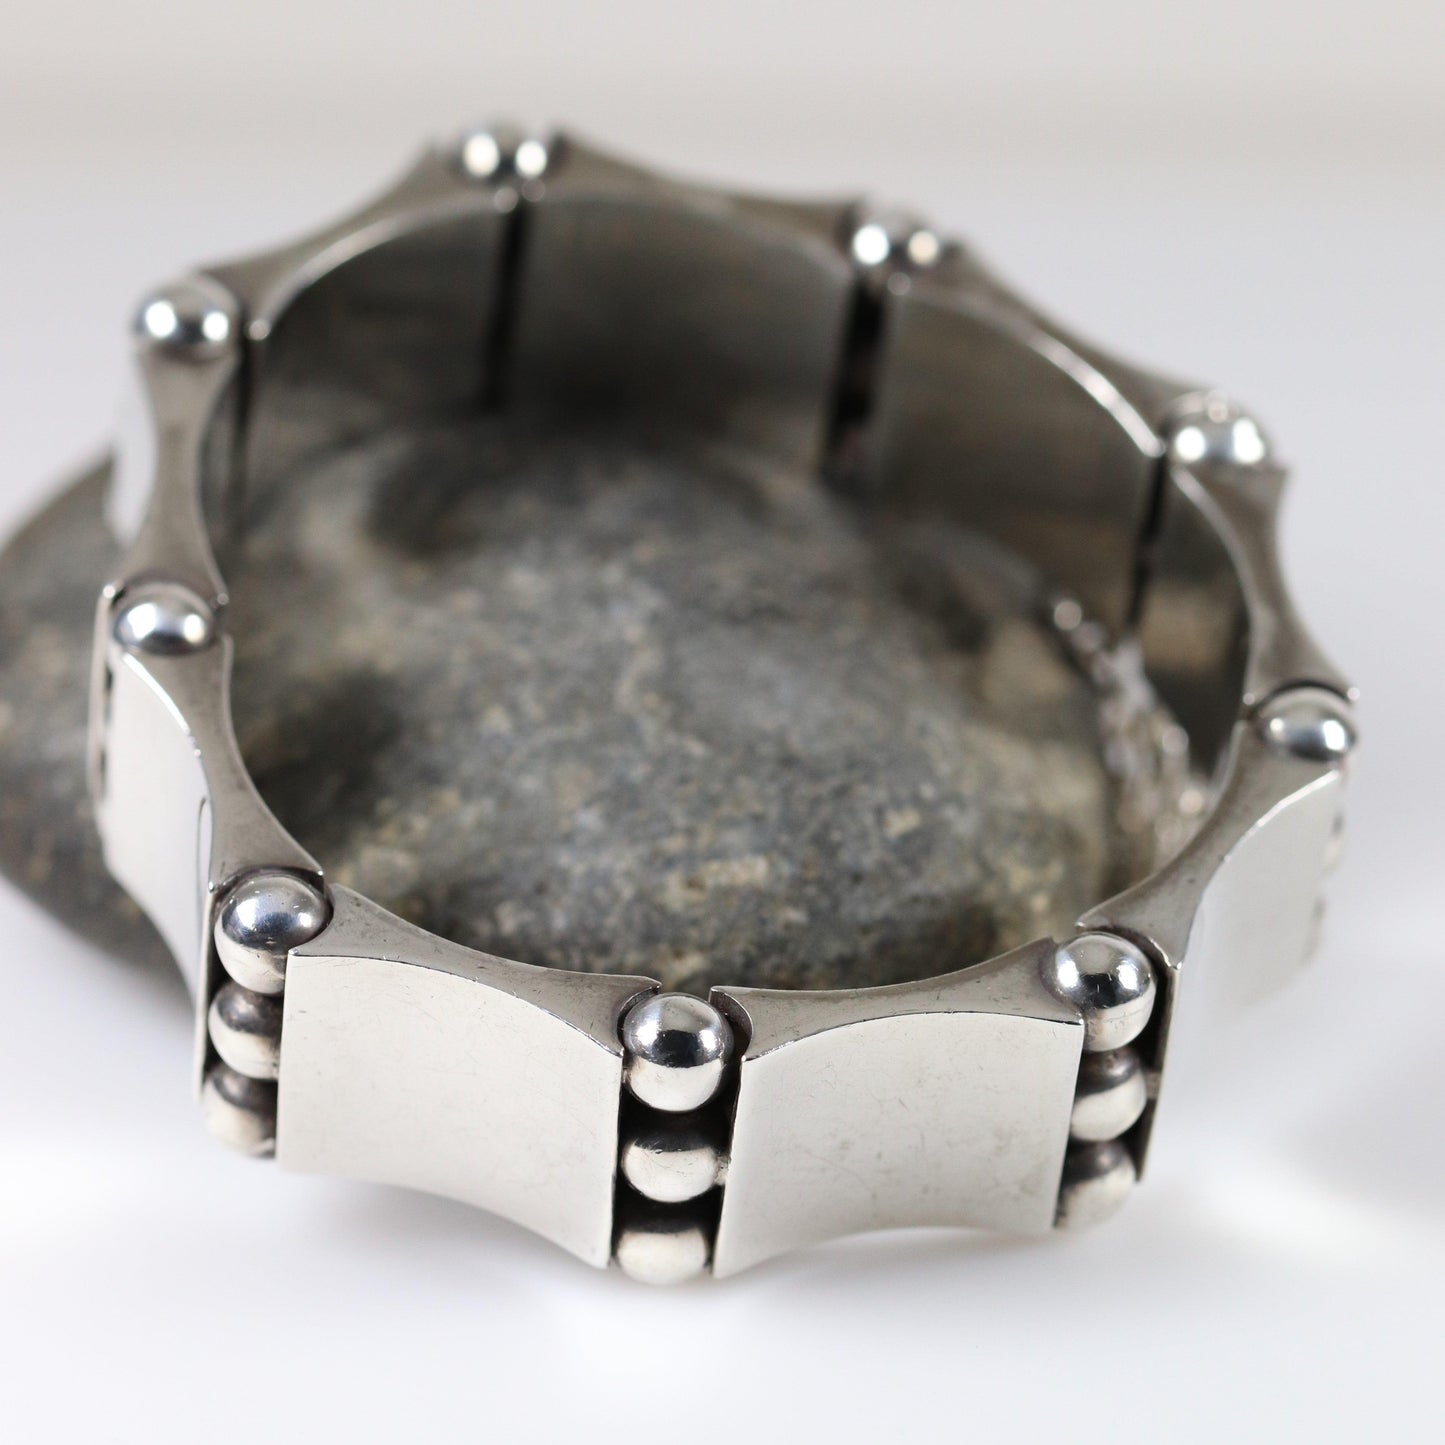 Vintage Hector Aguilar Taxco Silver Mexican Jewelry | Curved Panel Modernist Bracelet - Carmel Fine Silver Jewelry